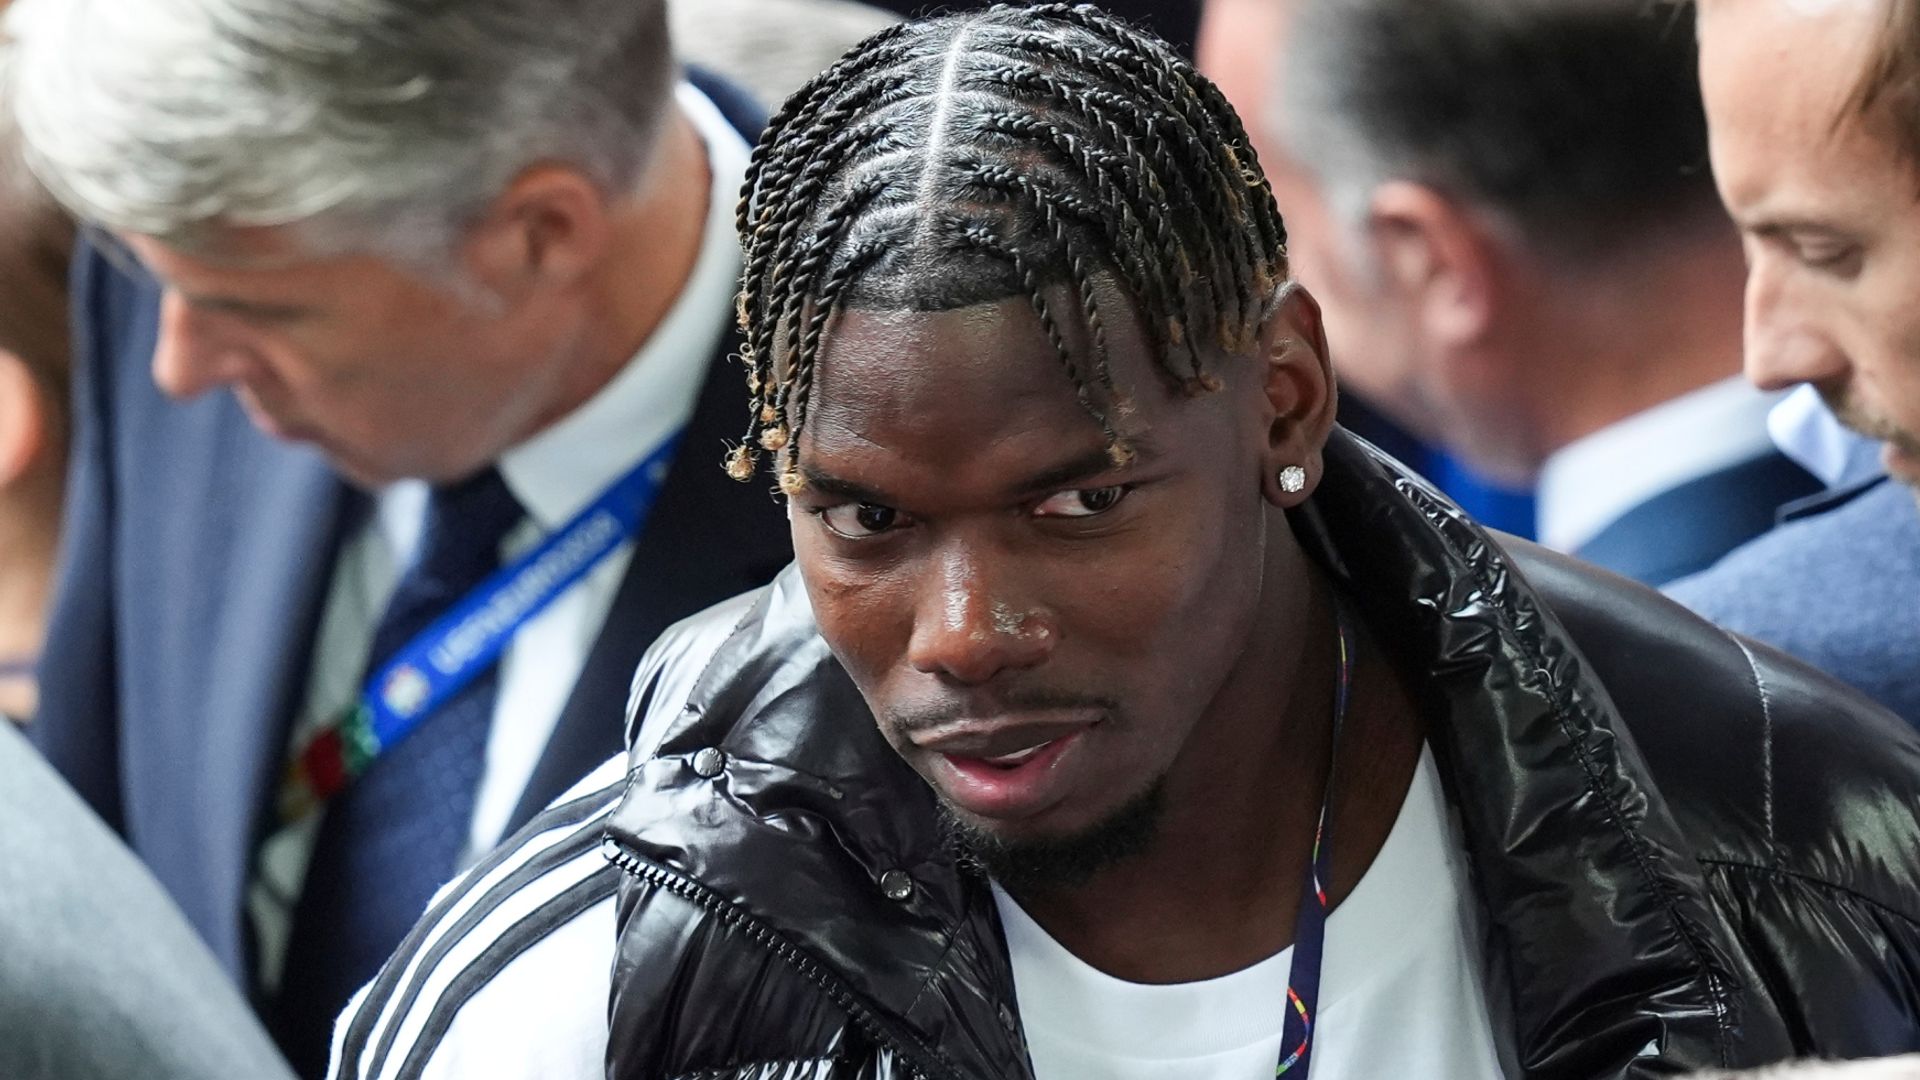 Pogba: I'm not finished yet, I want to fight doping ban 'injustice'